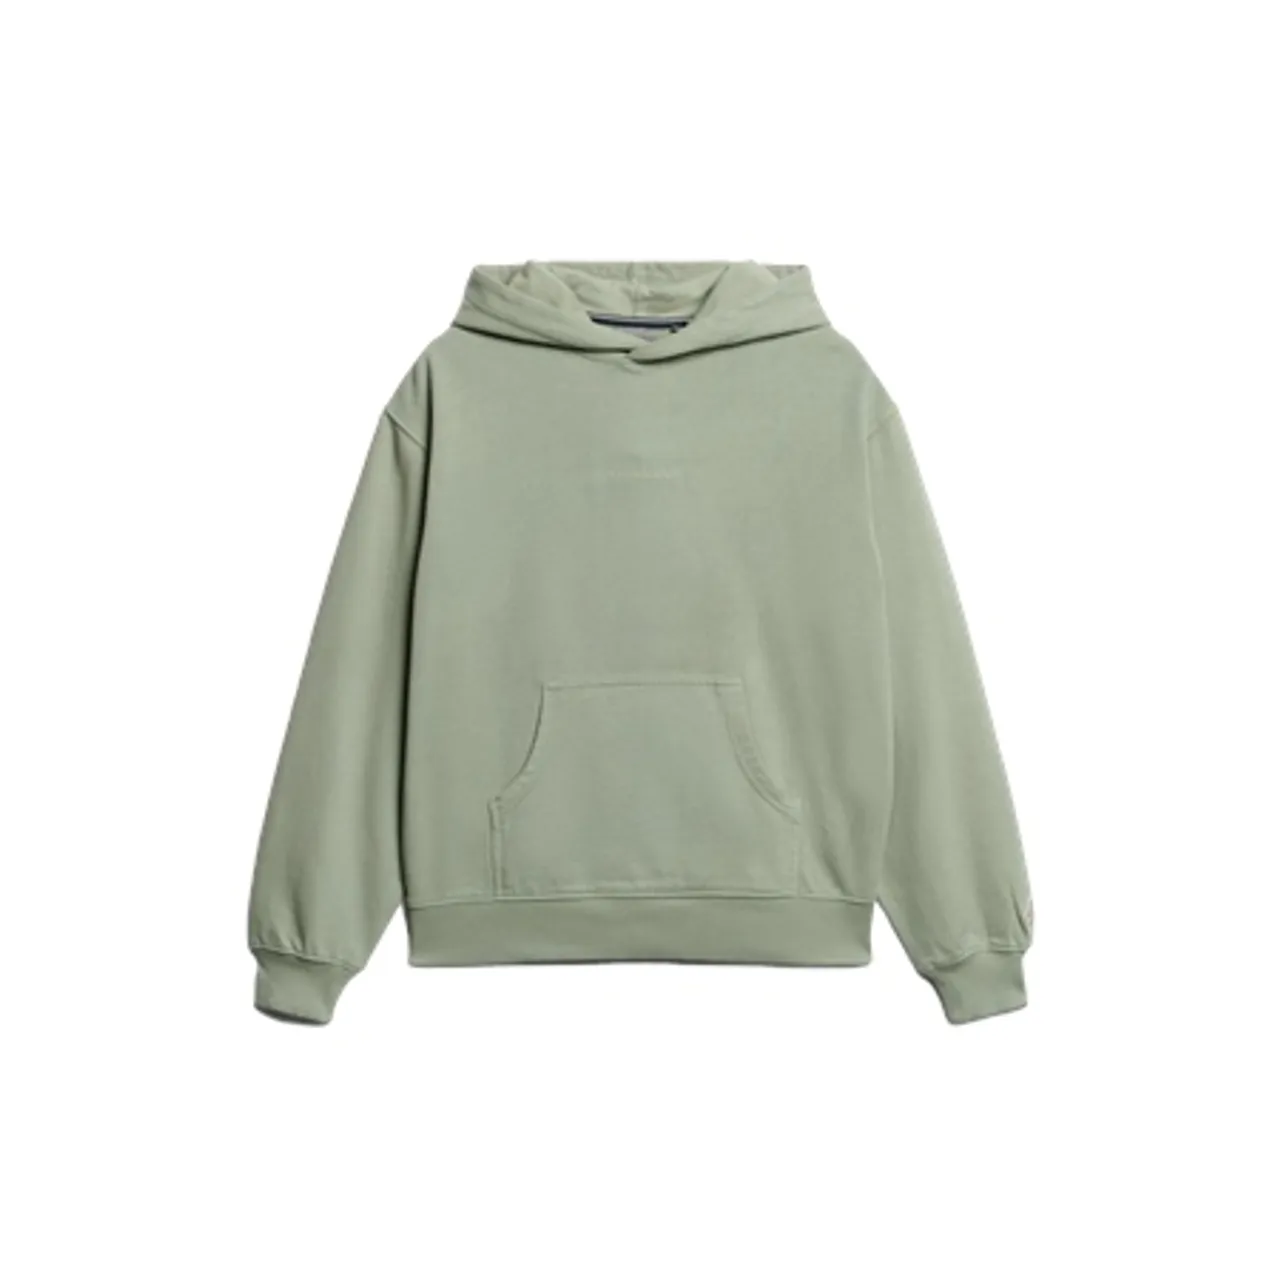 Superdry Micro Logo Embroidered Boxy Hoody - Light Jade Green